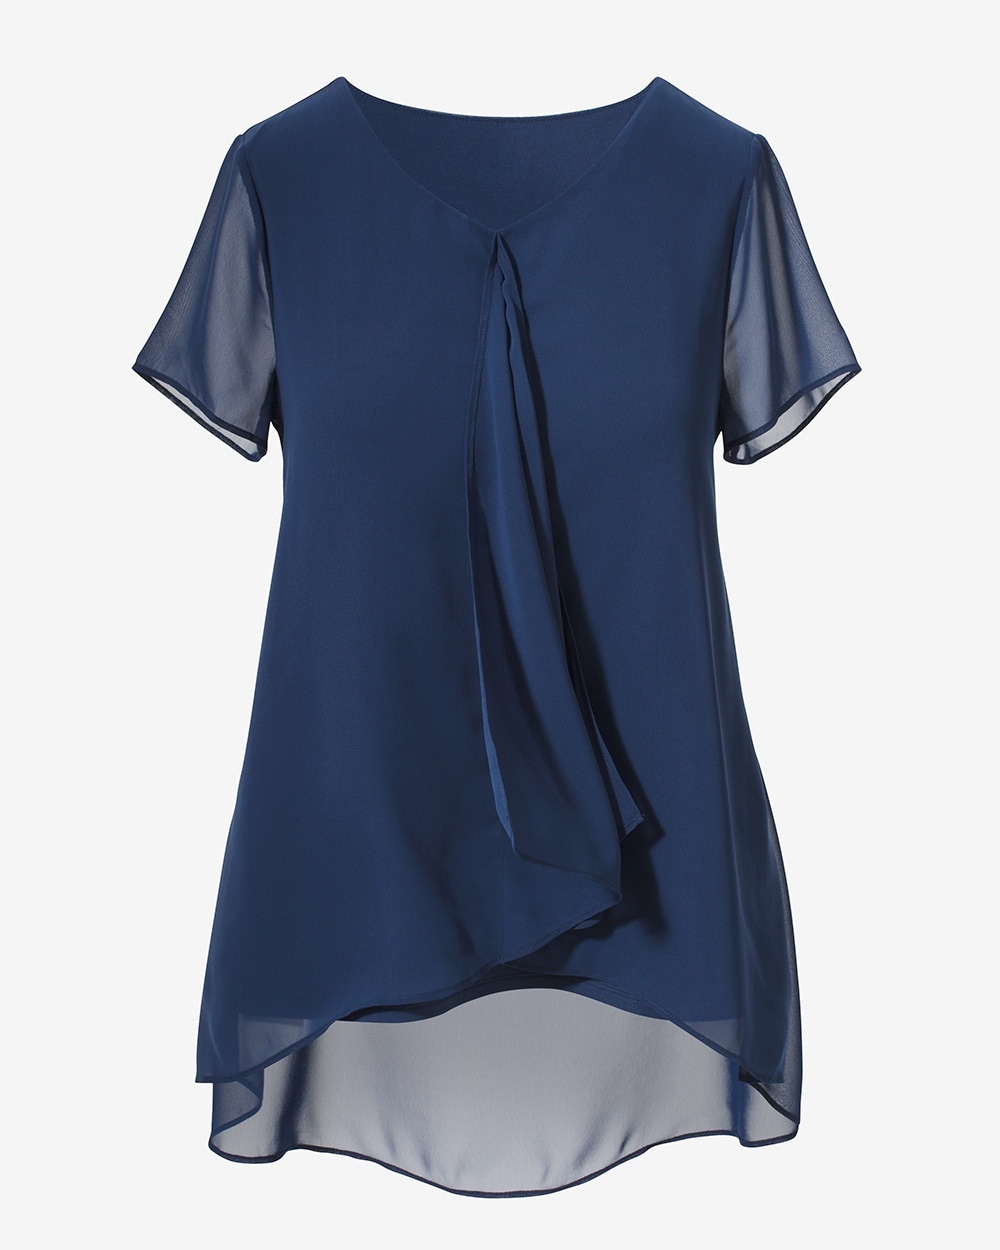 Easywear High-Low Double-Layer Tunic